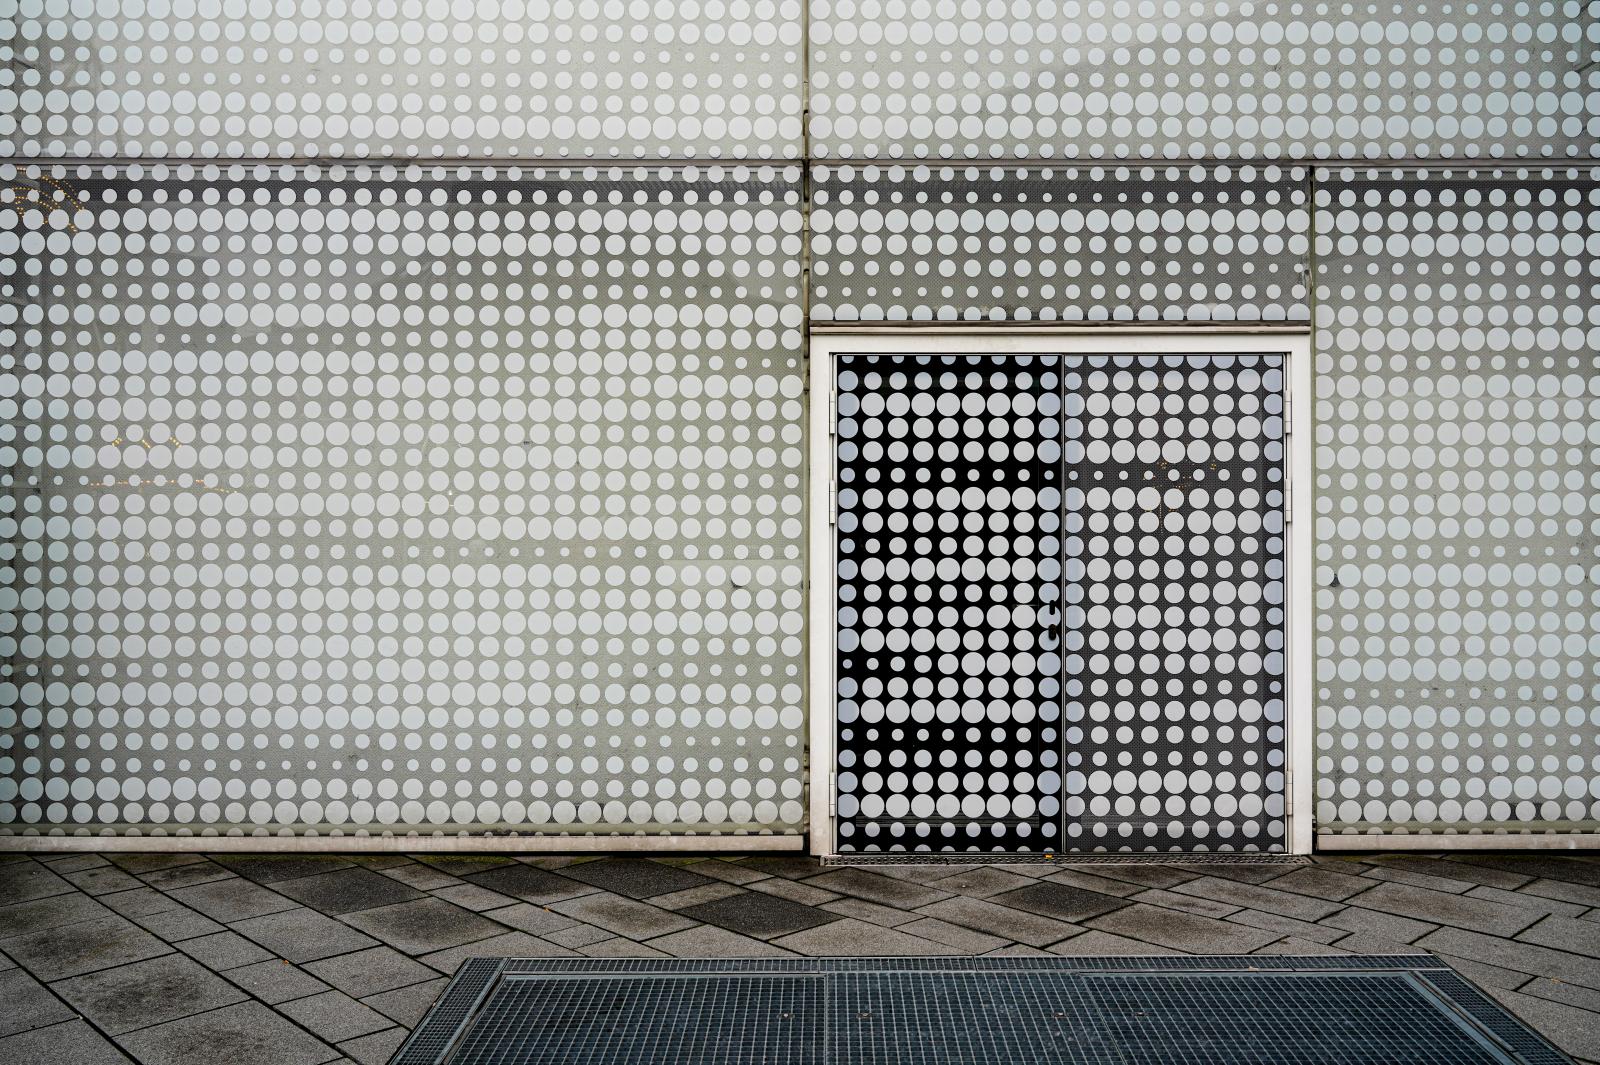 Image from New Photographs -  Koblenz, Germany  # 4105 12/2023 Polka Dots and...